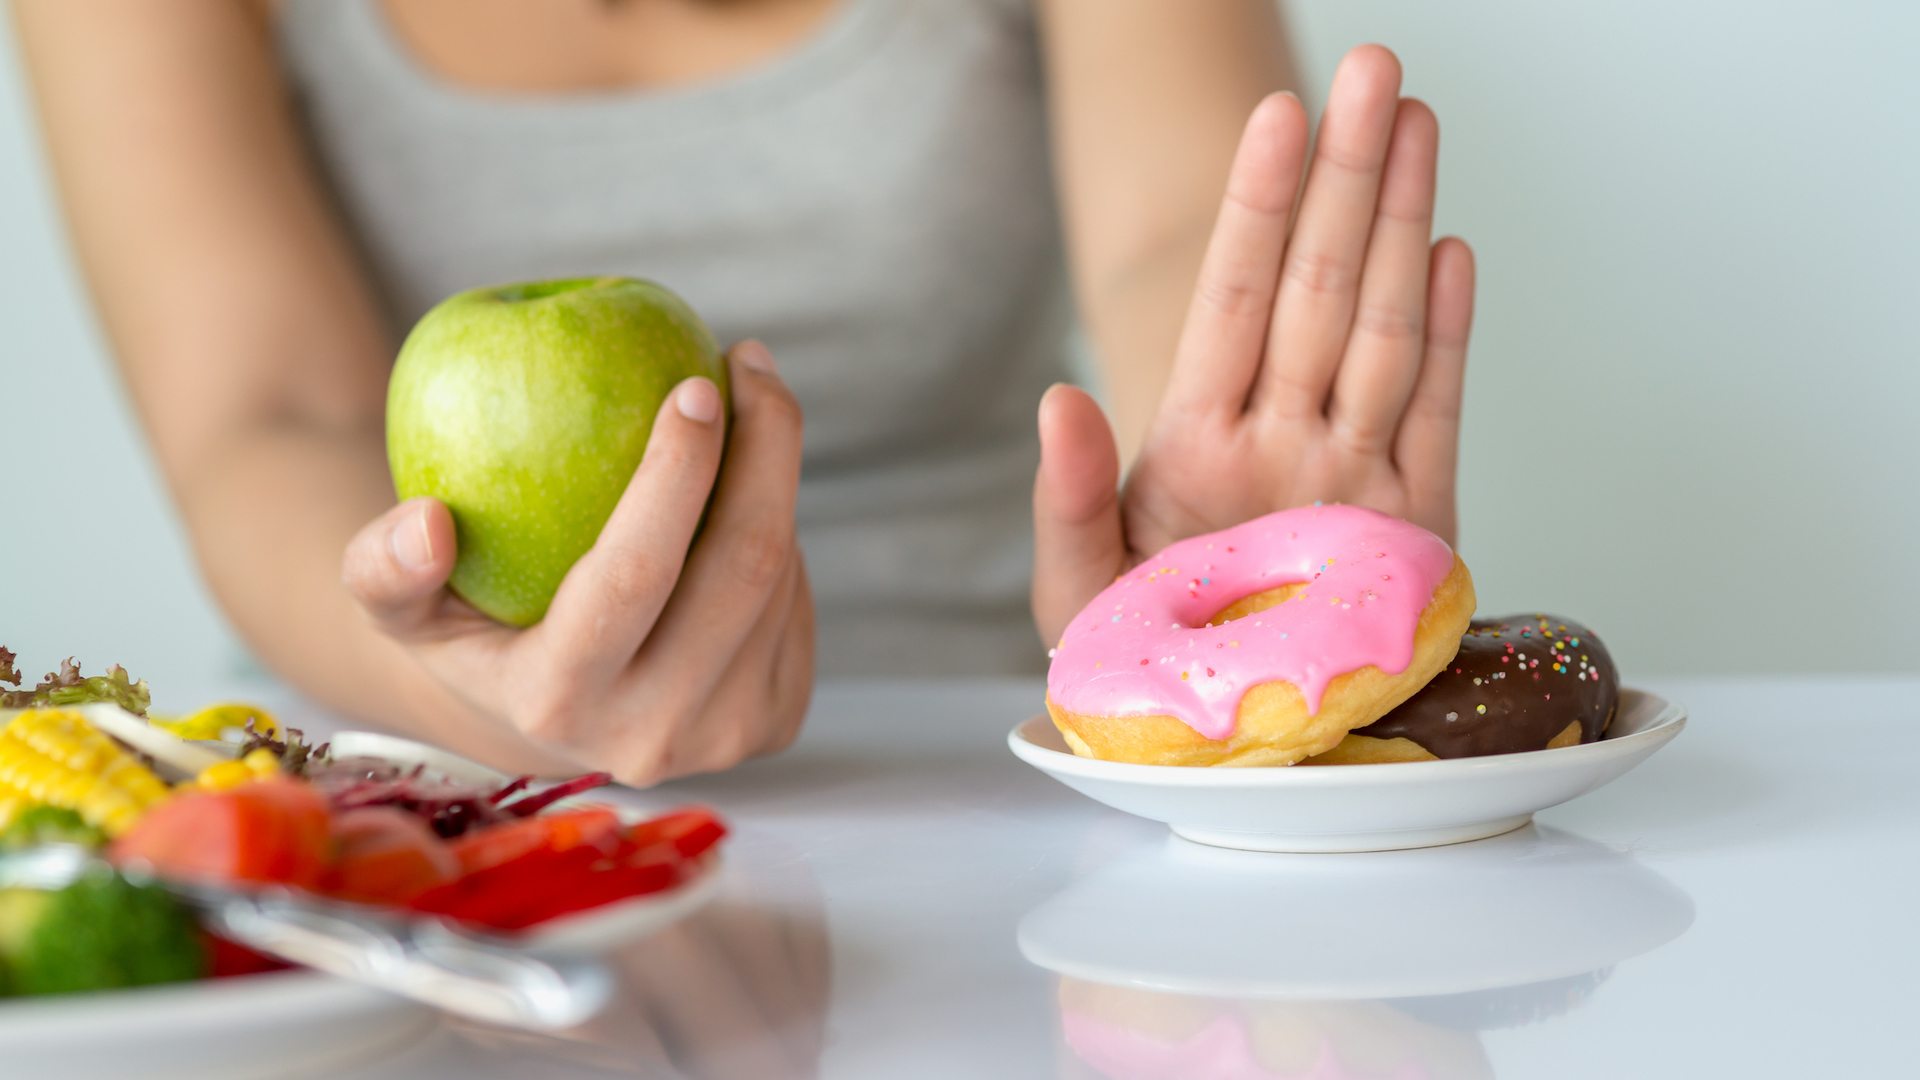 A person choosing an apple over a donut